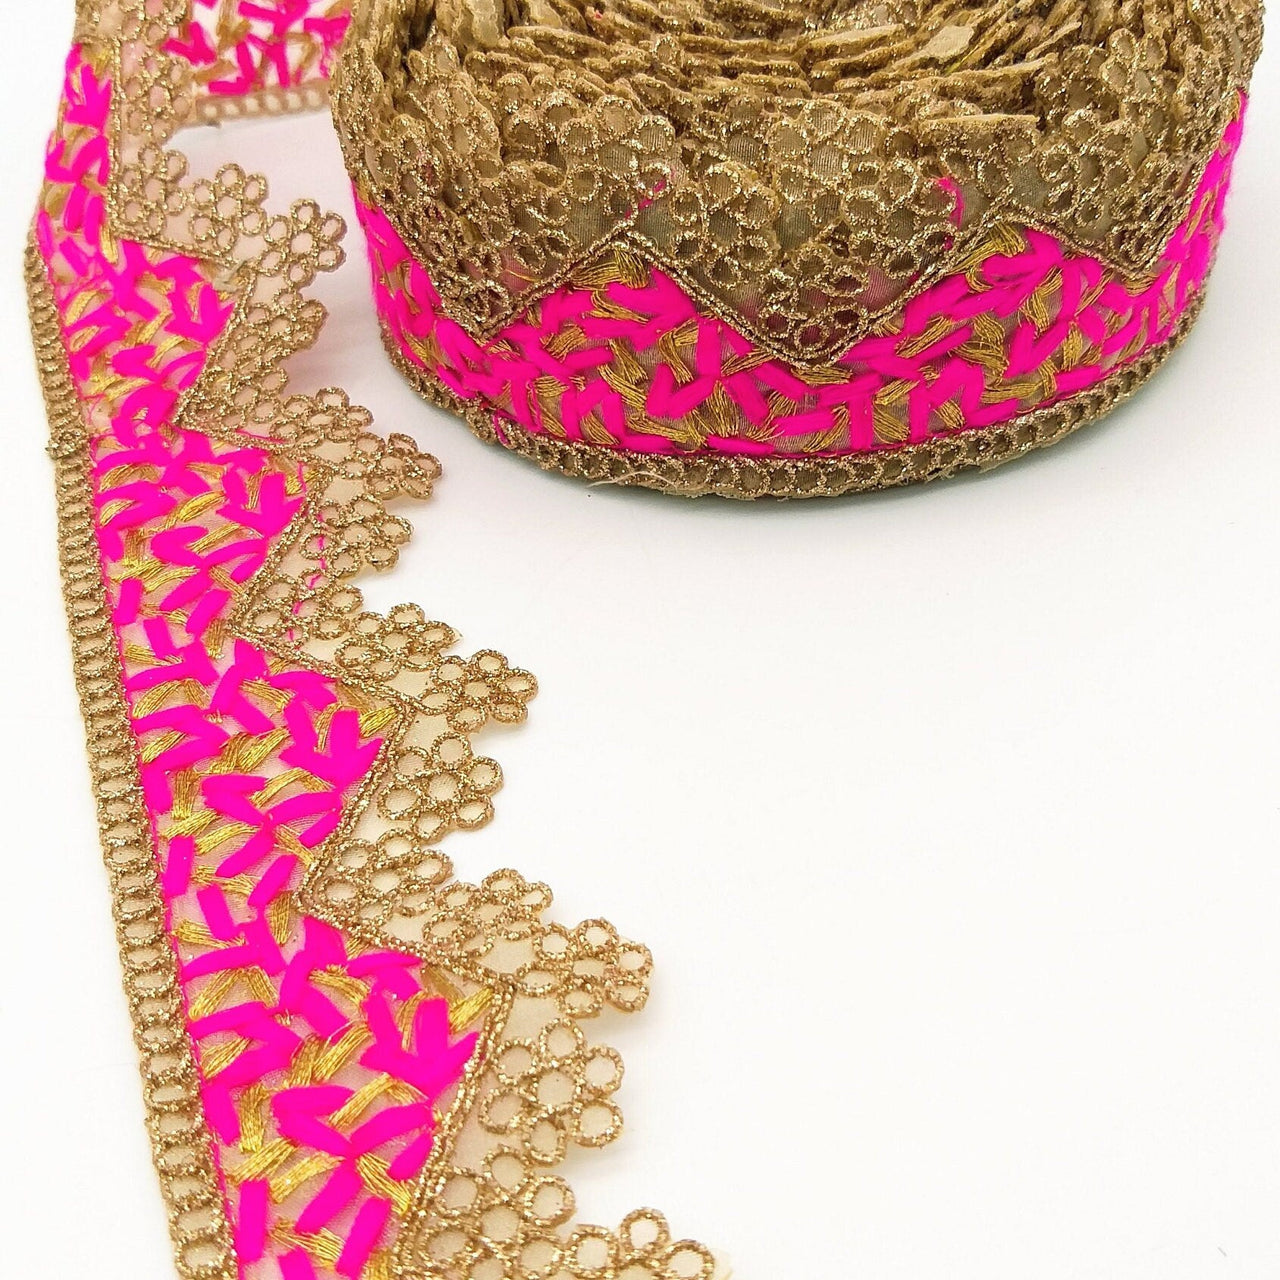 Gold Sheer Tissue Fabric Cutwork Trim with Embroidery in Gold and Fuchsia Pink, Scallop Trim, Fringe Trim